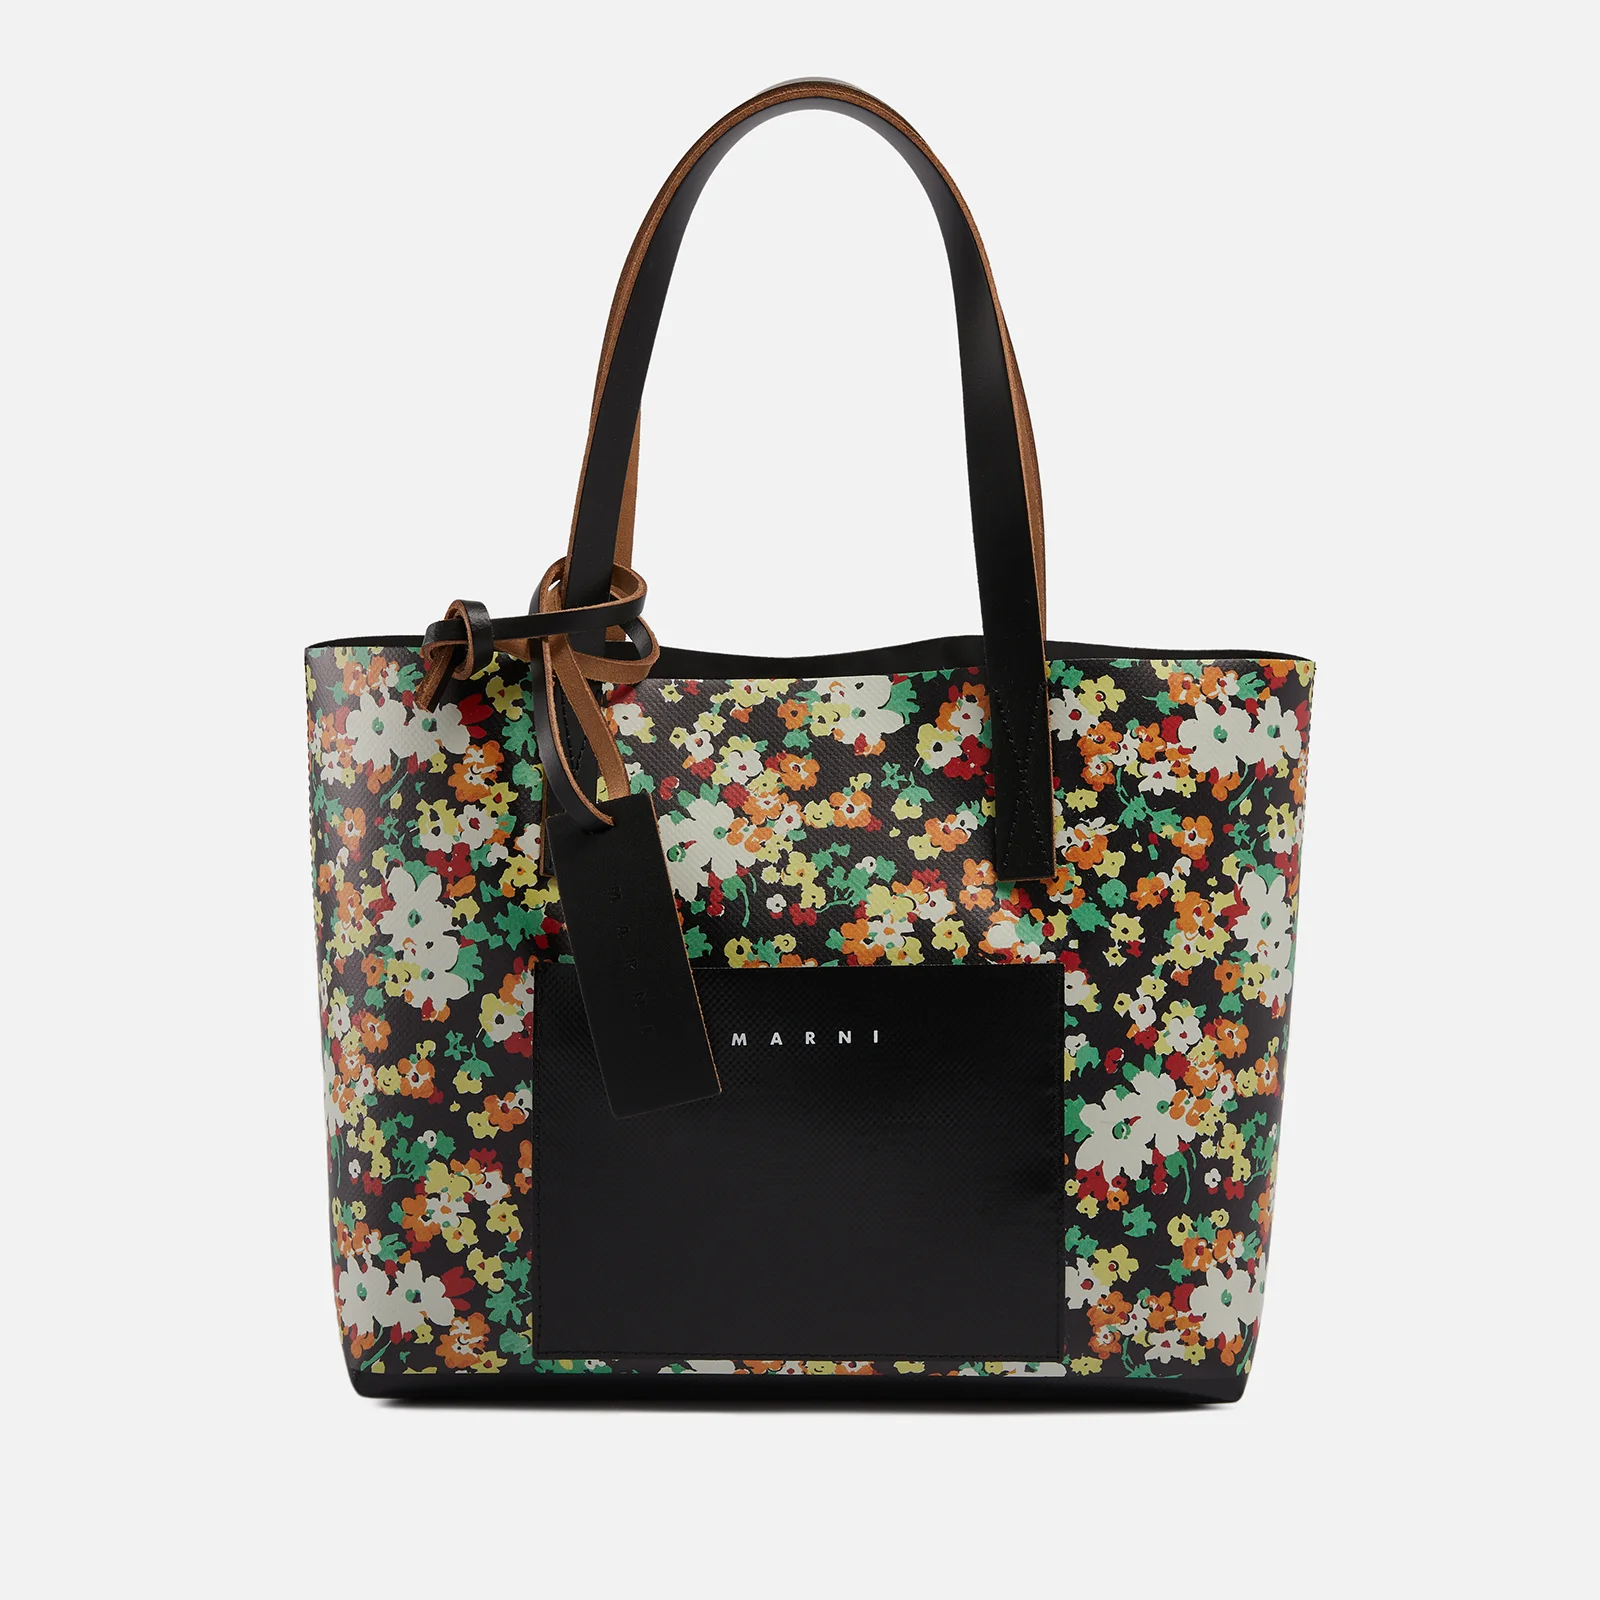 Marni Small East West Floral-Print PVC Tote Bag Image 1